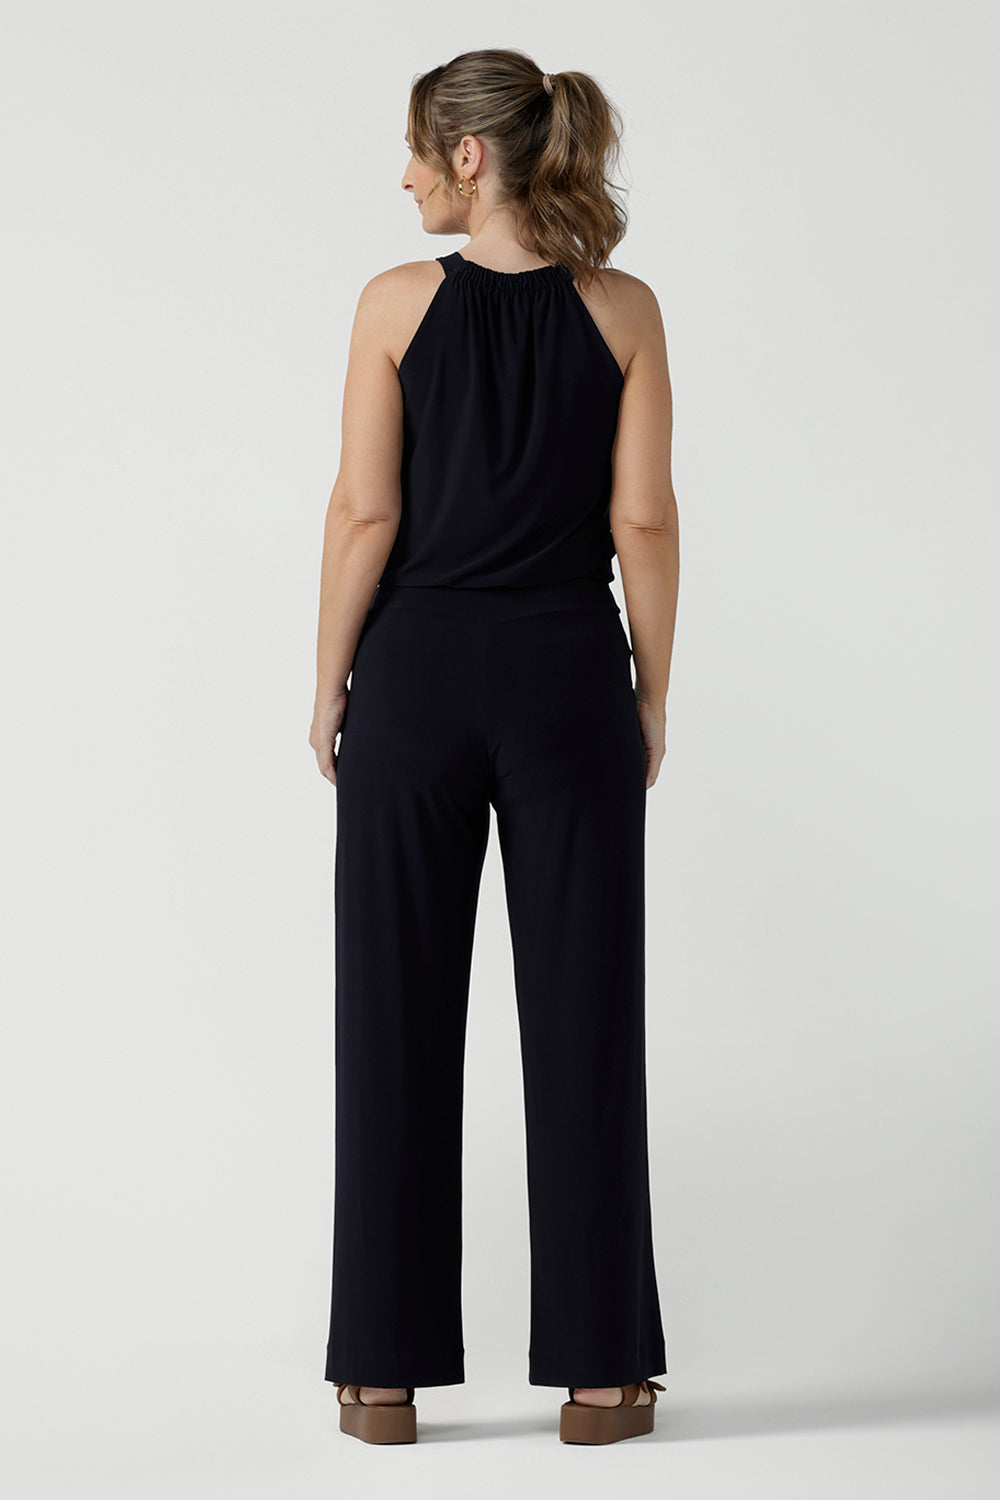 Womens size 8 jersey jumpsuit in navy. Smart casual womens jumpsuit. 